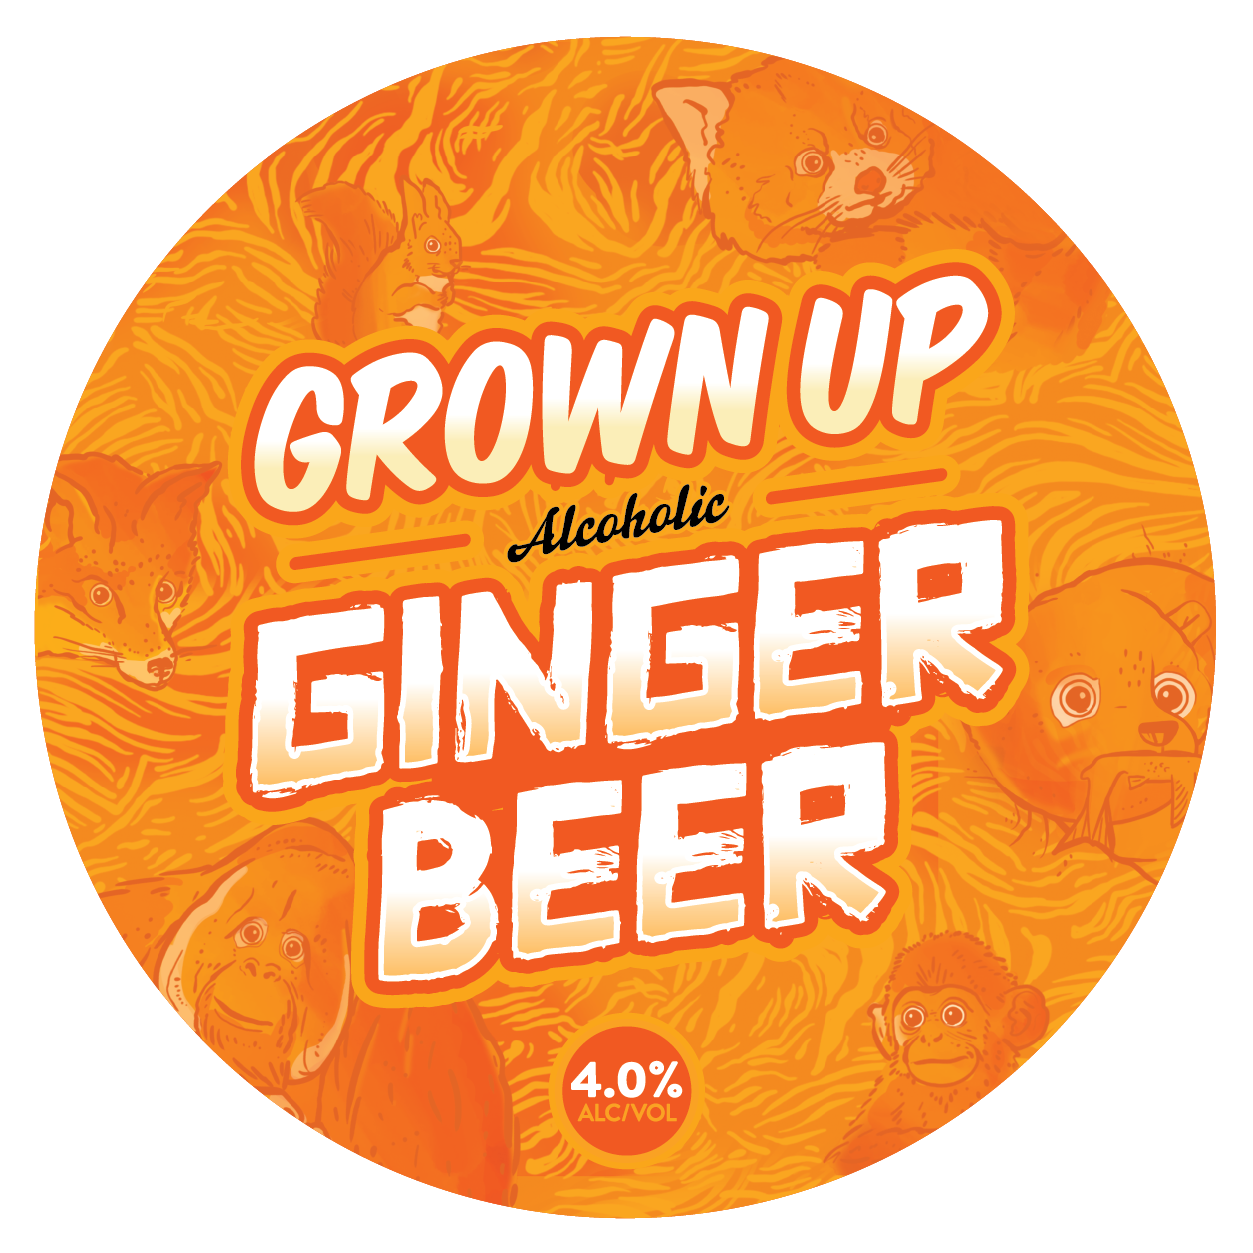 The tap badge for Sprig and Fern's Grown Up Alcoholic Ginger Beer